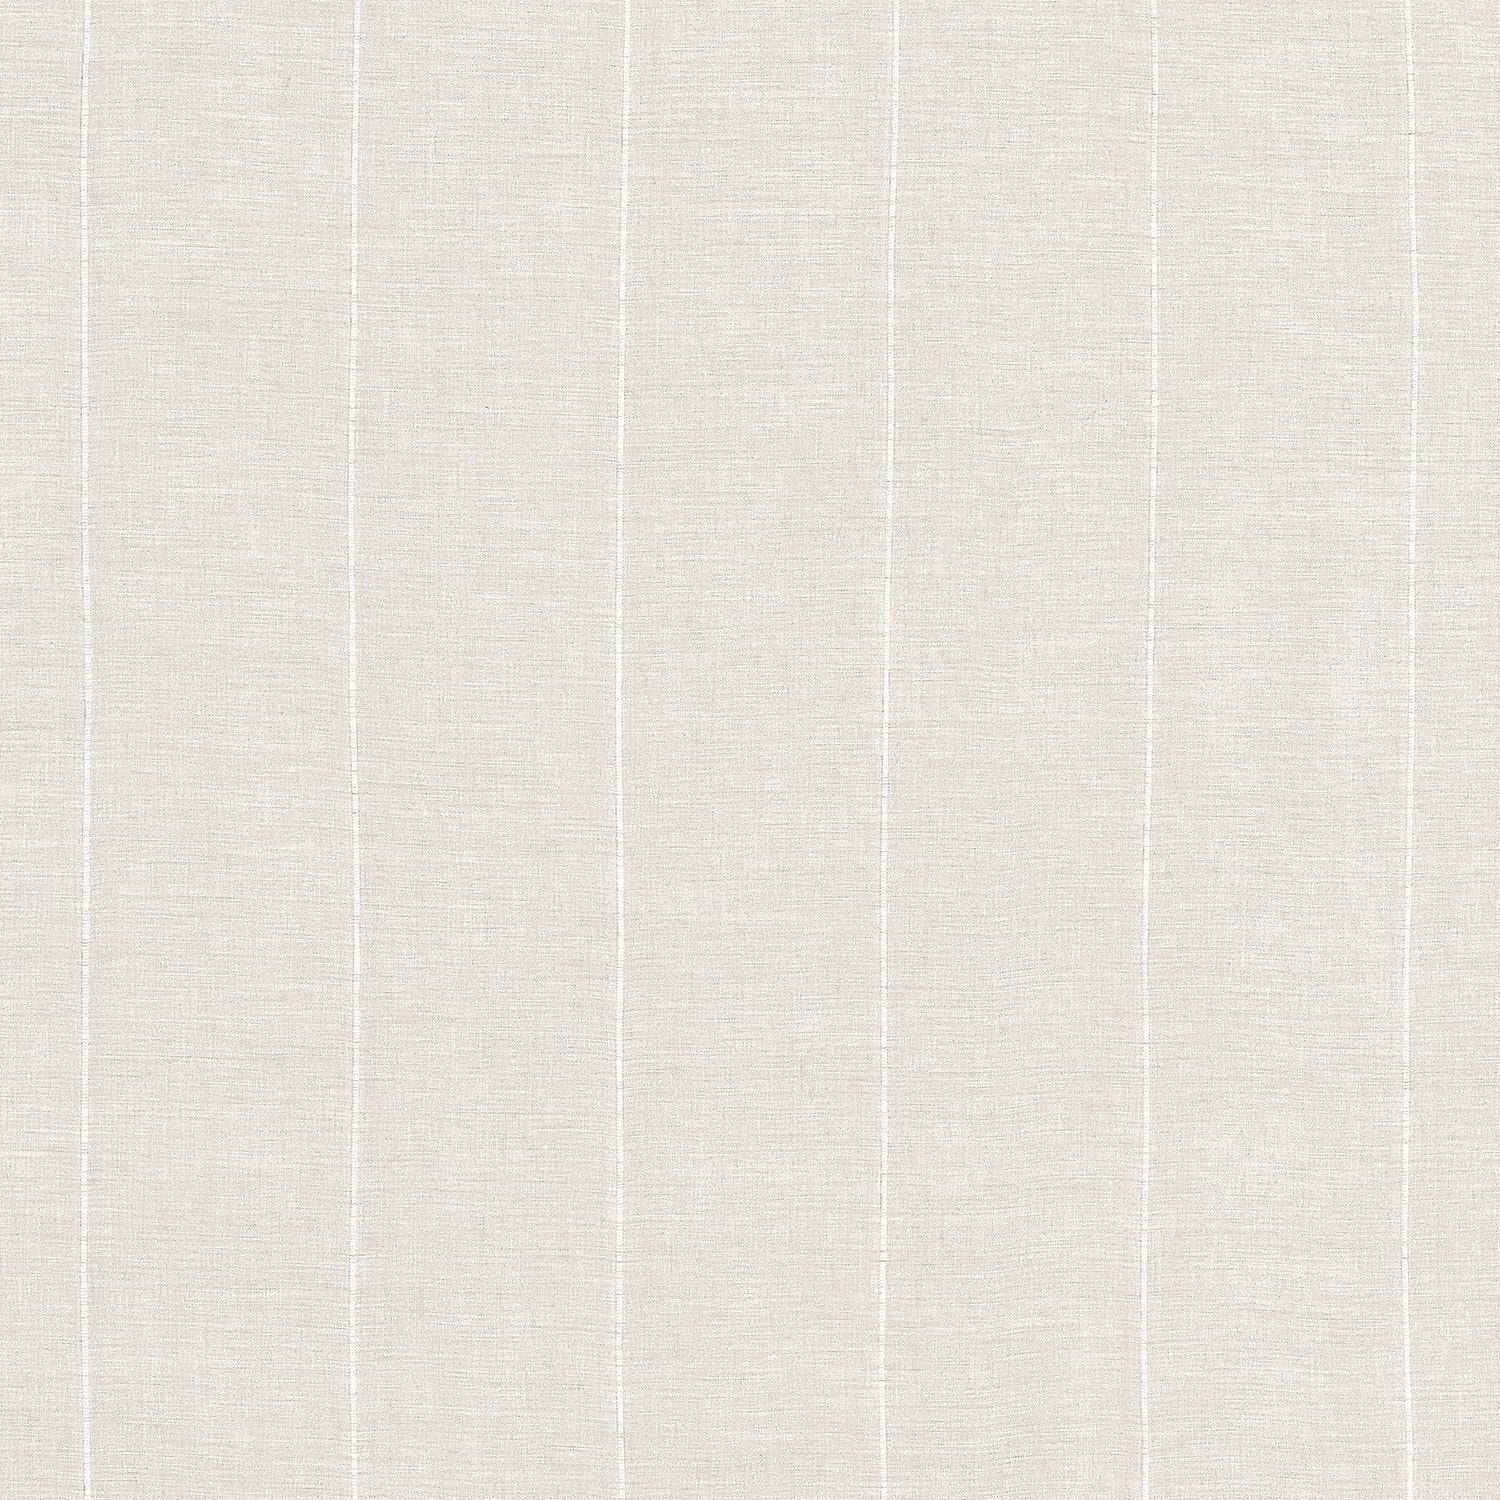 Crestline fabric in flax color - pattern number FWW81738 - by Thibaut in the Locale Wide Width collection